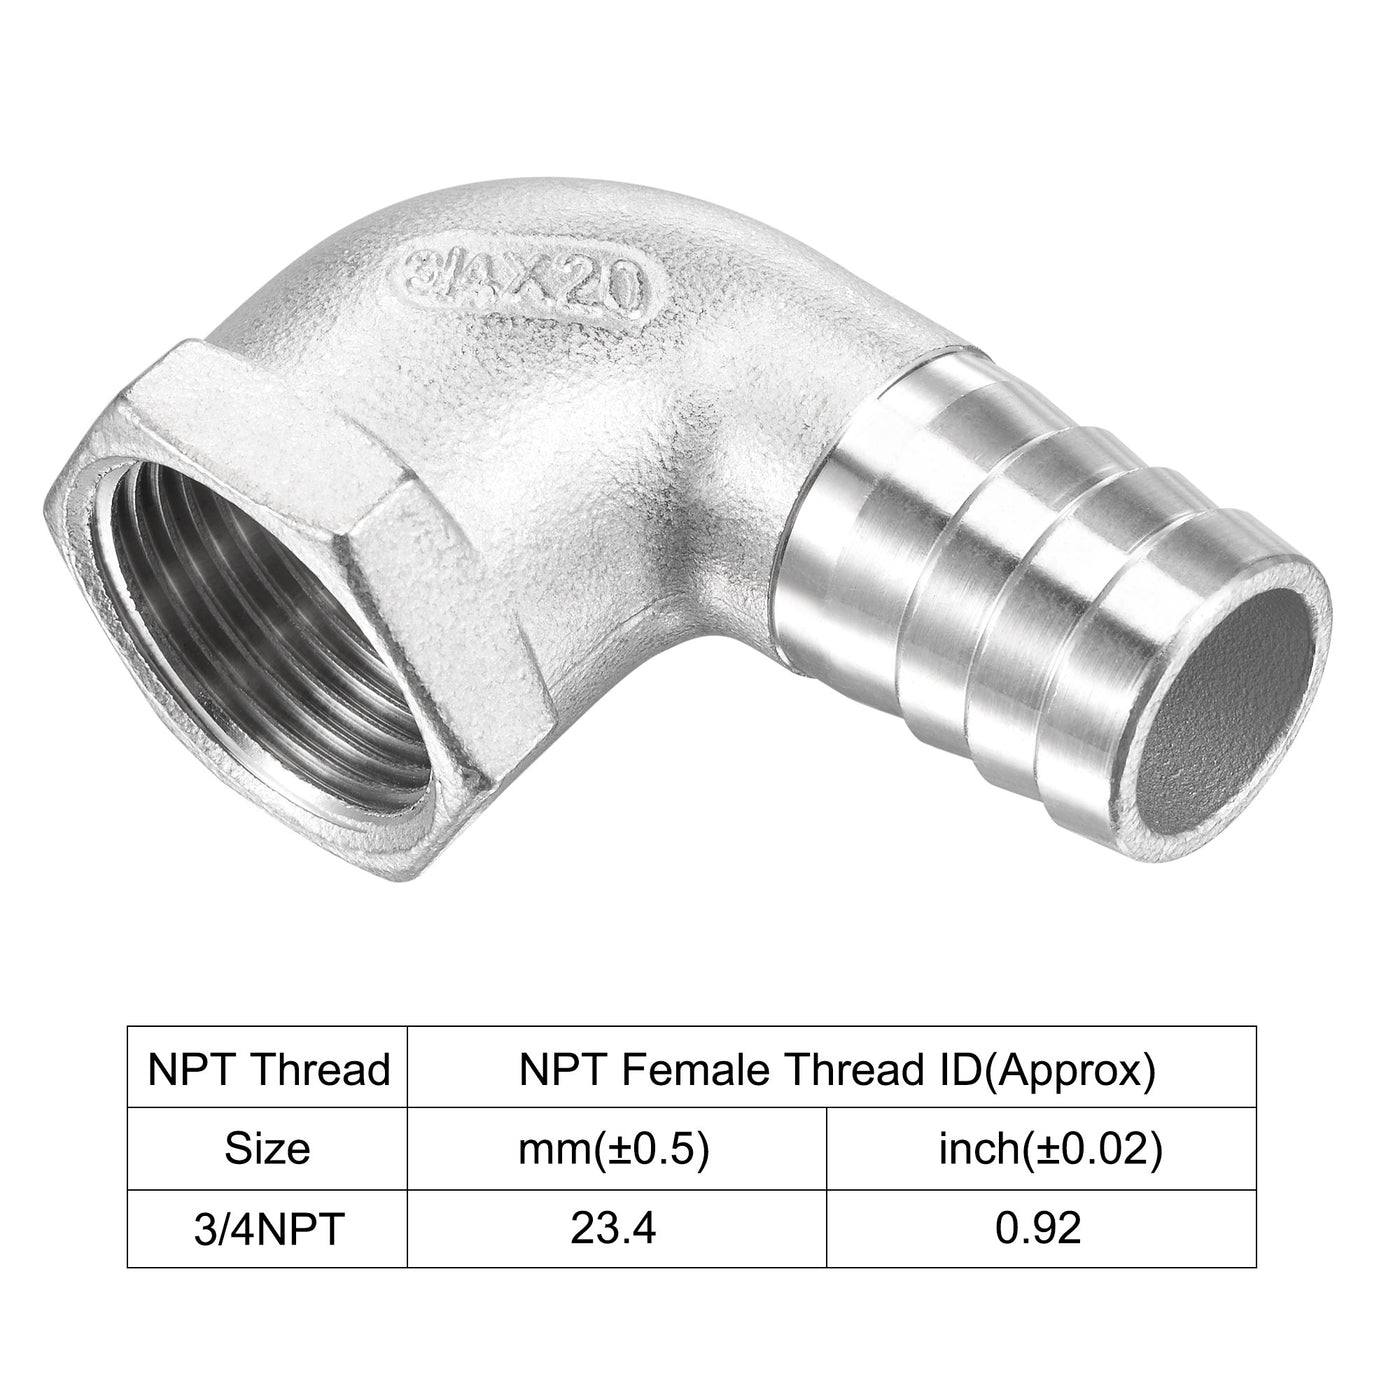 Uxcell Uxcell Stainless Steel Hose Barb Fitting Elbow 25mm x 3/4" NPT Female Pipe Connector